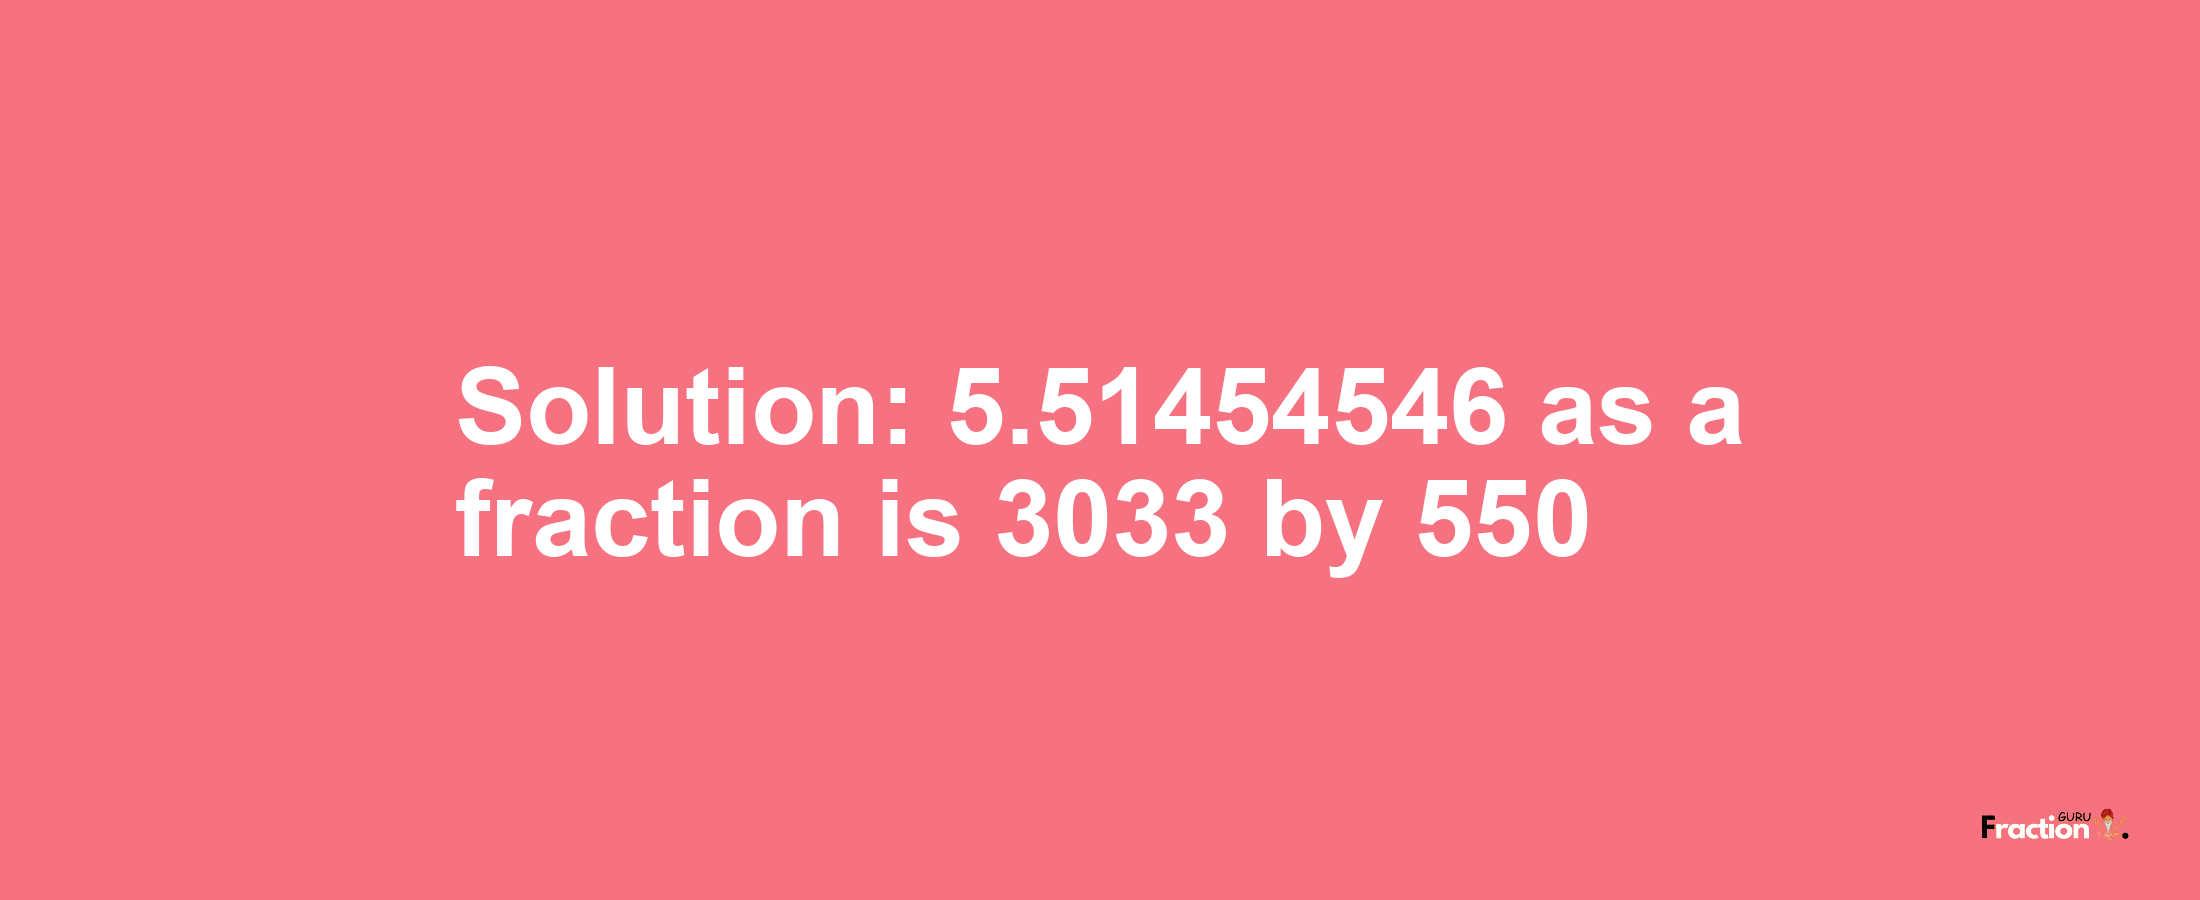 Solution:5.51454546 as a fraction is 3033/550